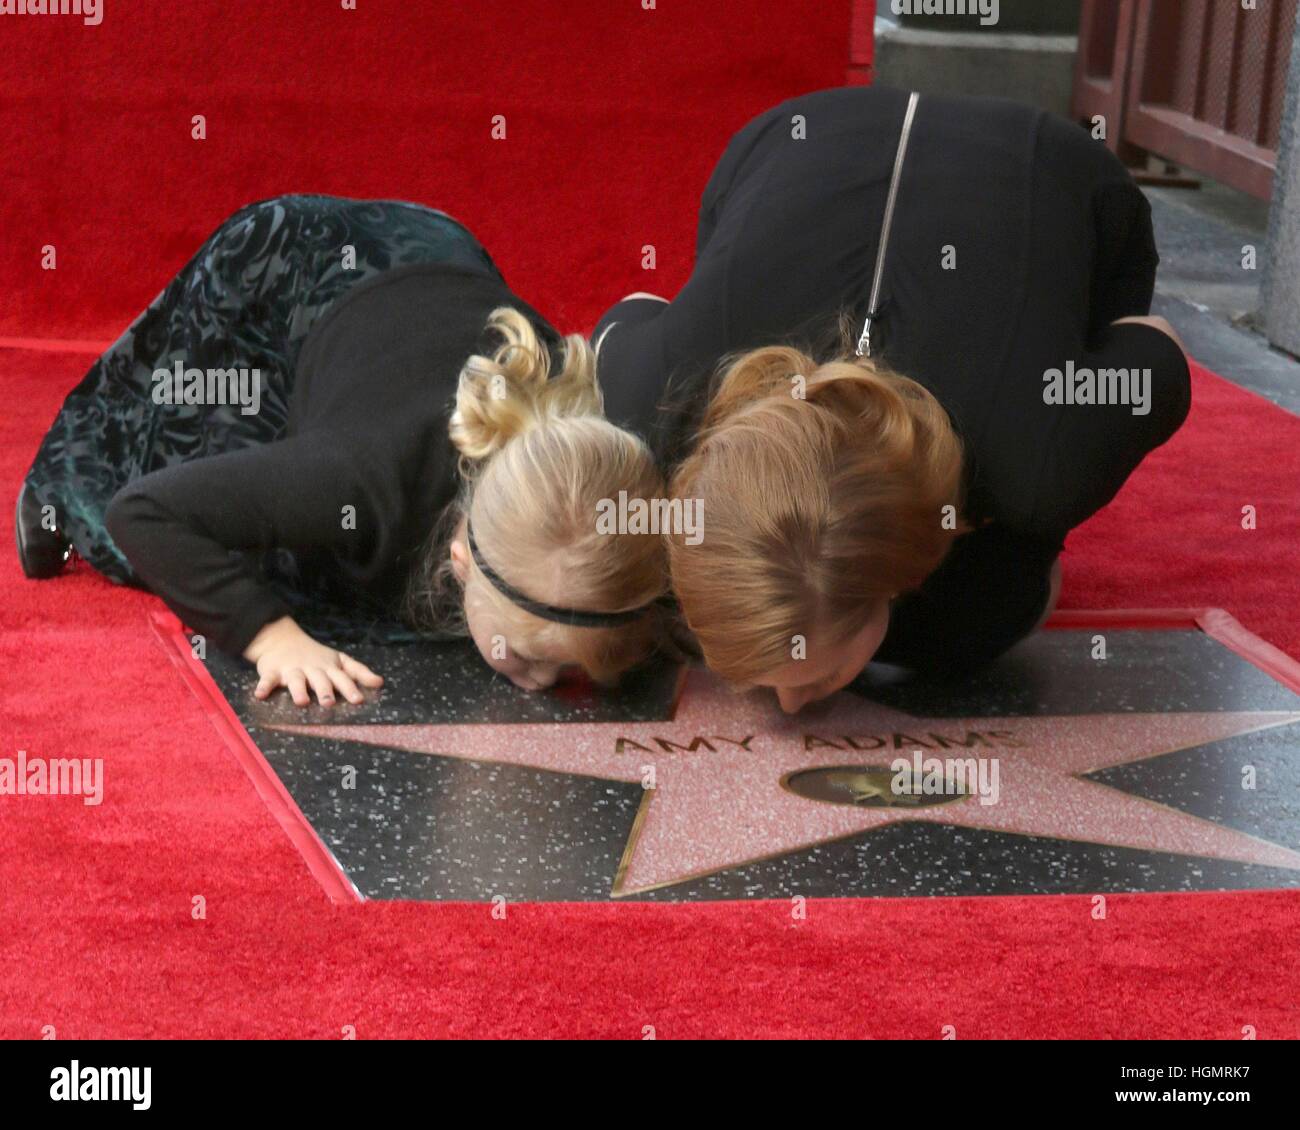 Los Angeles, CA, USA. 11th Jan, 2017. Aviana Olea Le Gallo, Amy Adams at the press conference for Star on the Hollywood Walk of Fame for Amy Adams, Hollywood Boulevard, Los Angeles, CA. Credit: Priscilla Grant/Everett Collection/Alamy Live News Stock Photo